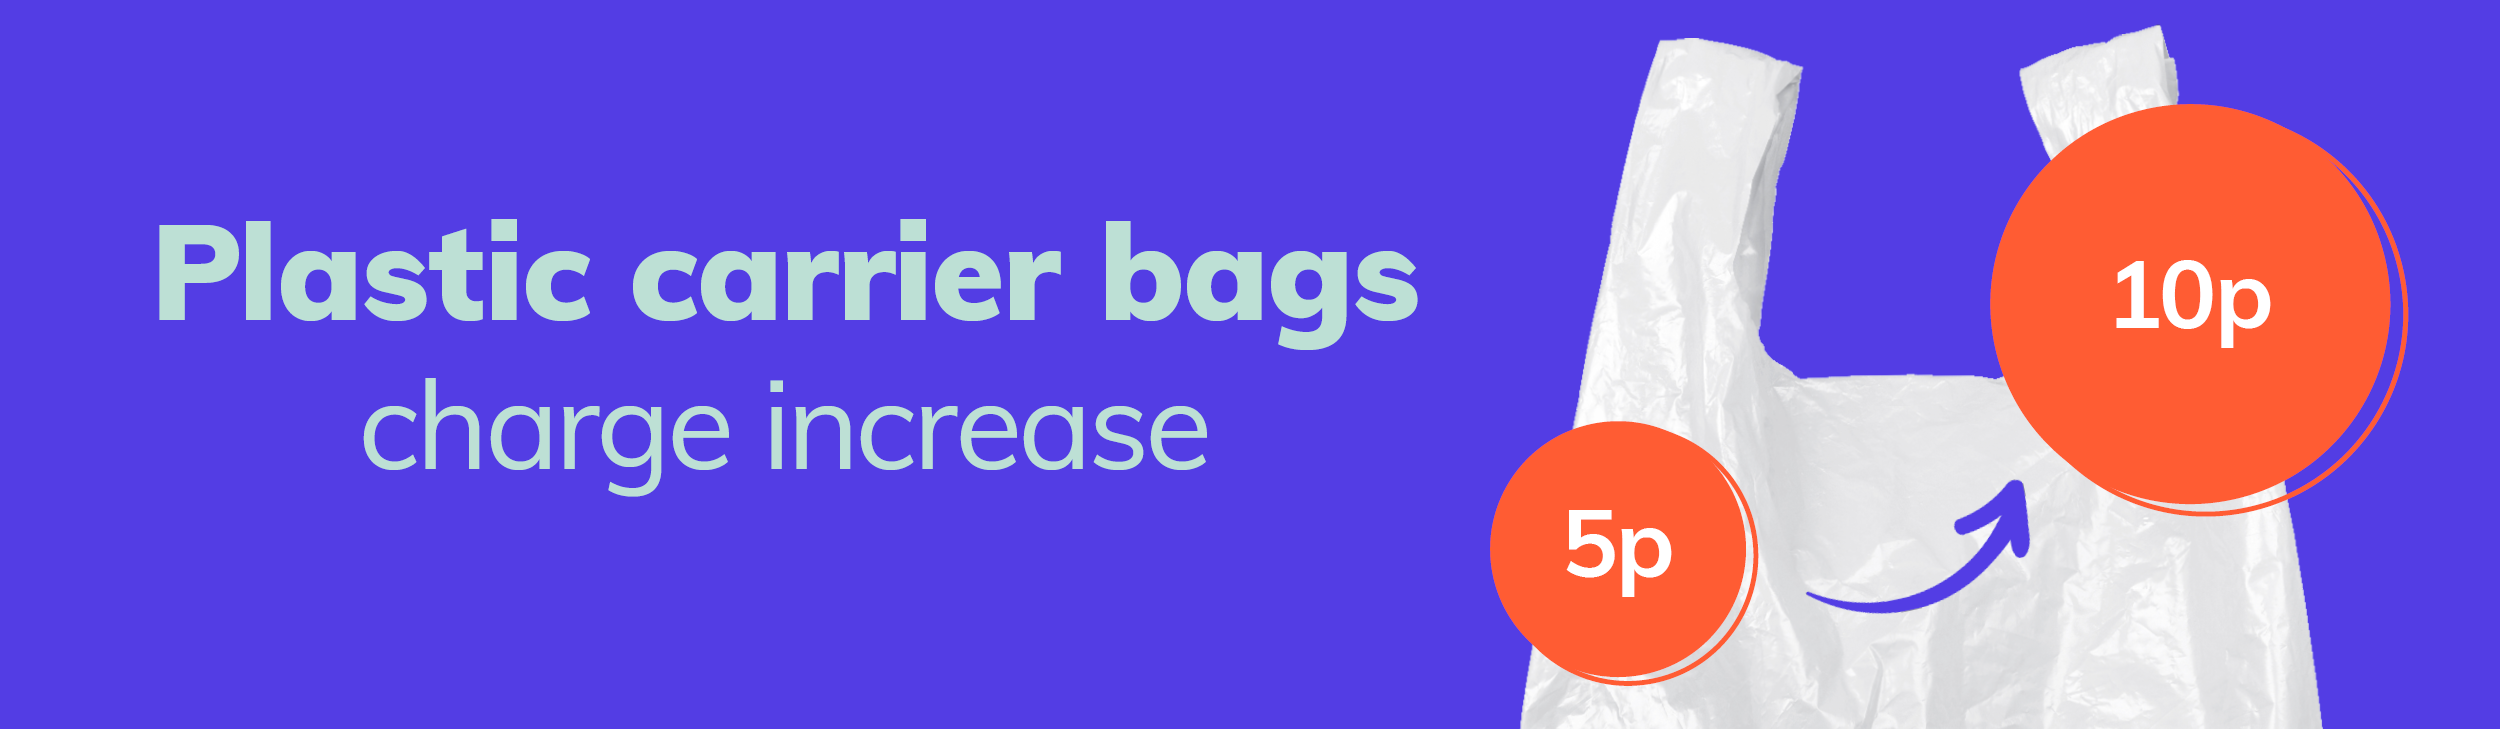 How can we reduce the environmental impact of plastic carrier bags